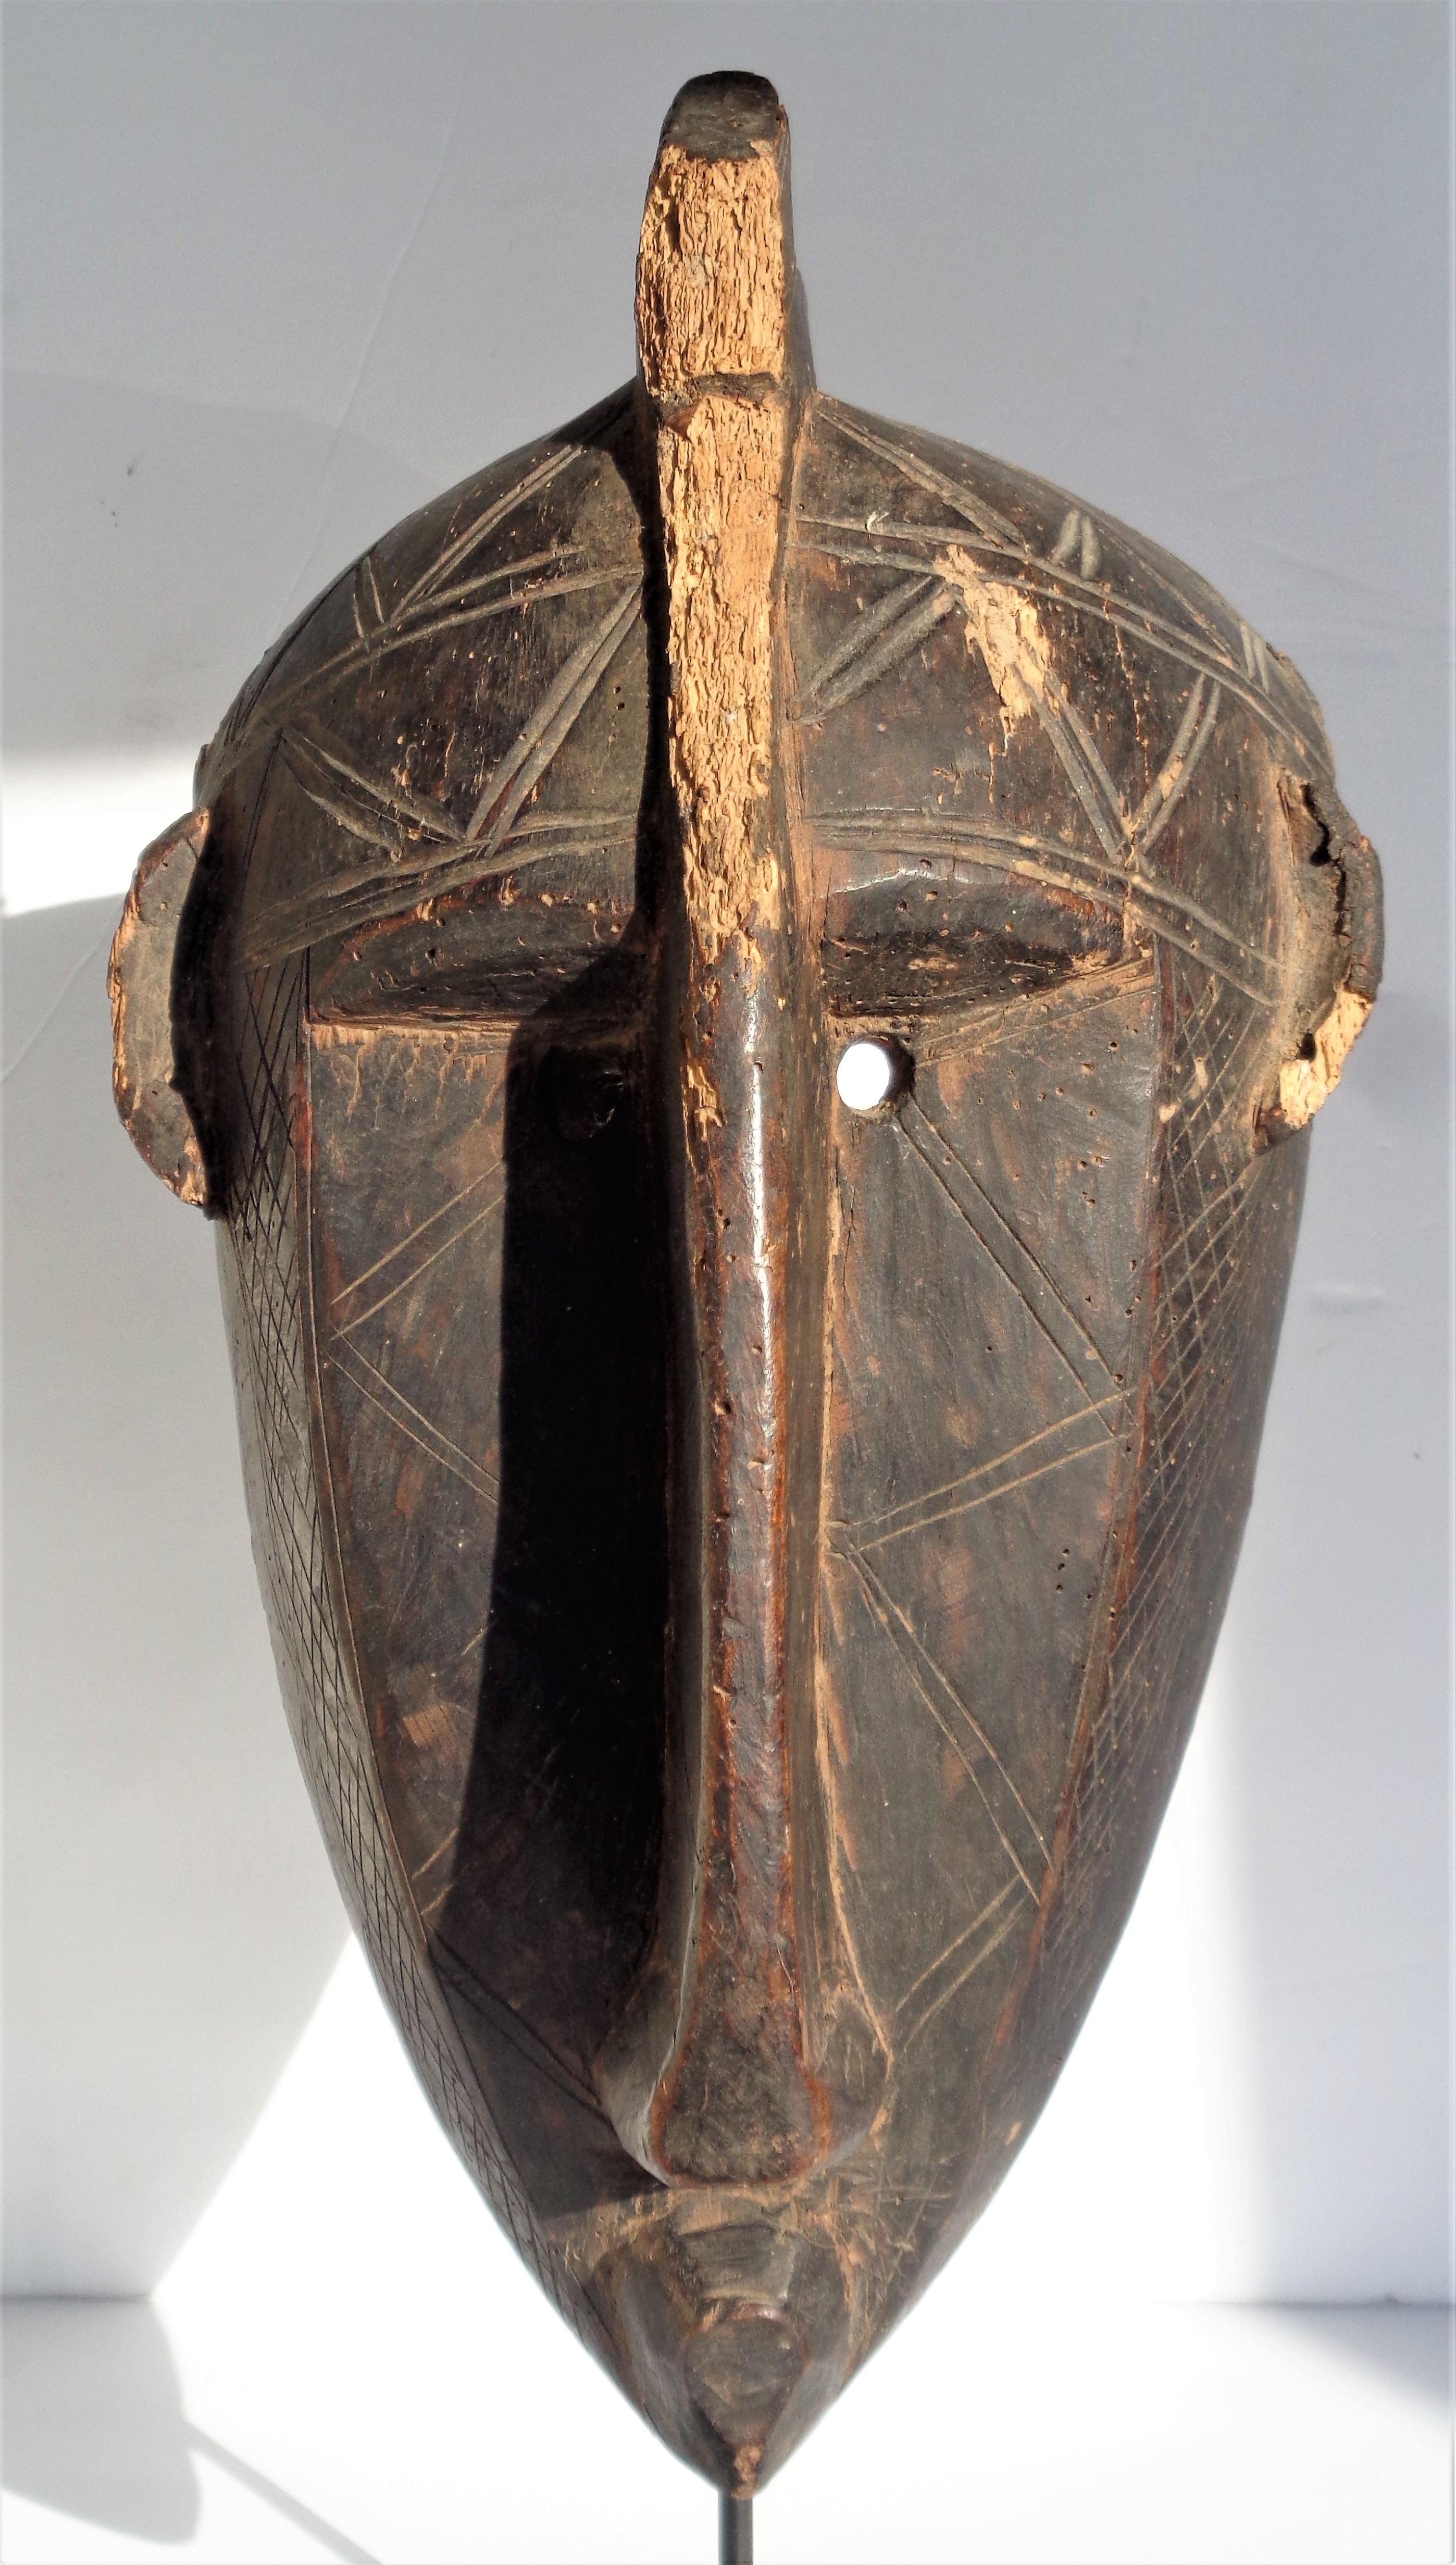 Bamana mask from Mali with deep set eyes, small highly placed ears, head crest extending down joining long prominent nose and the face with zig-zag patterns. Beautifully aged original old surface color with areas of  wood loss, genuine wear and some